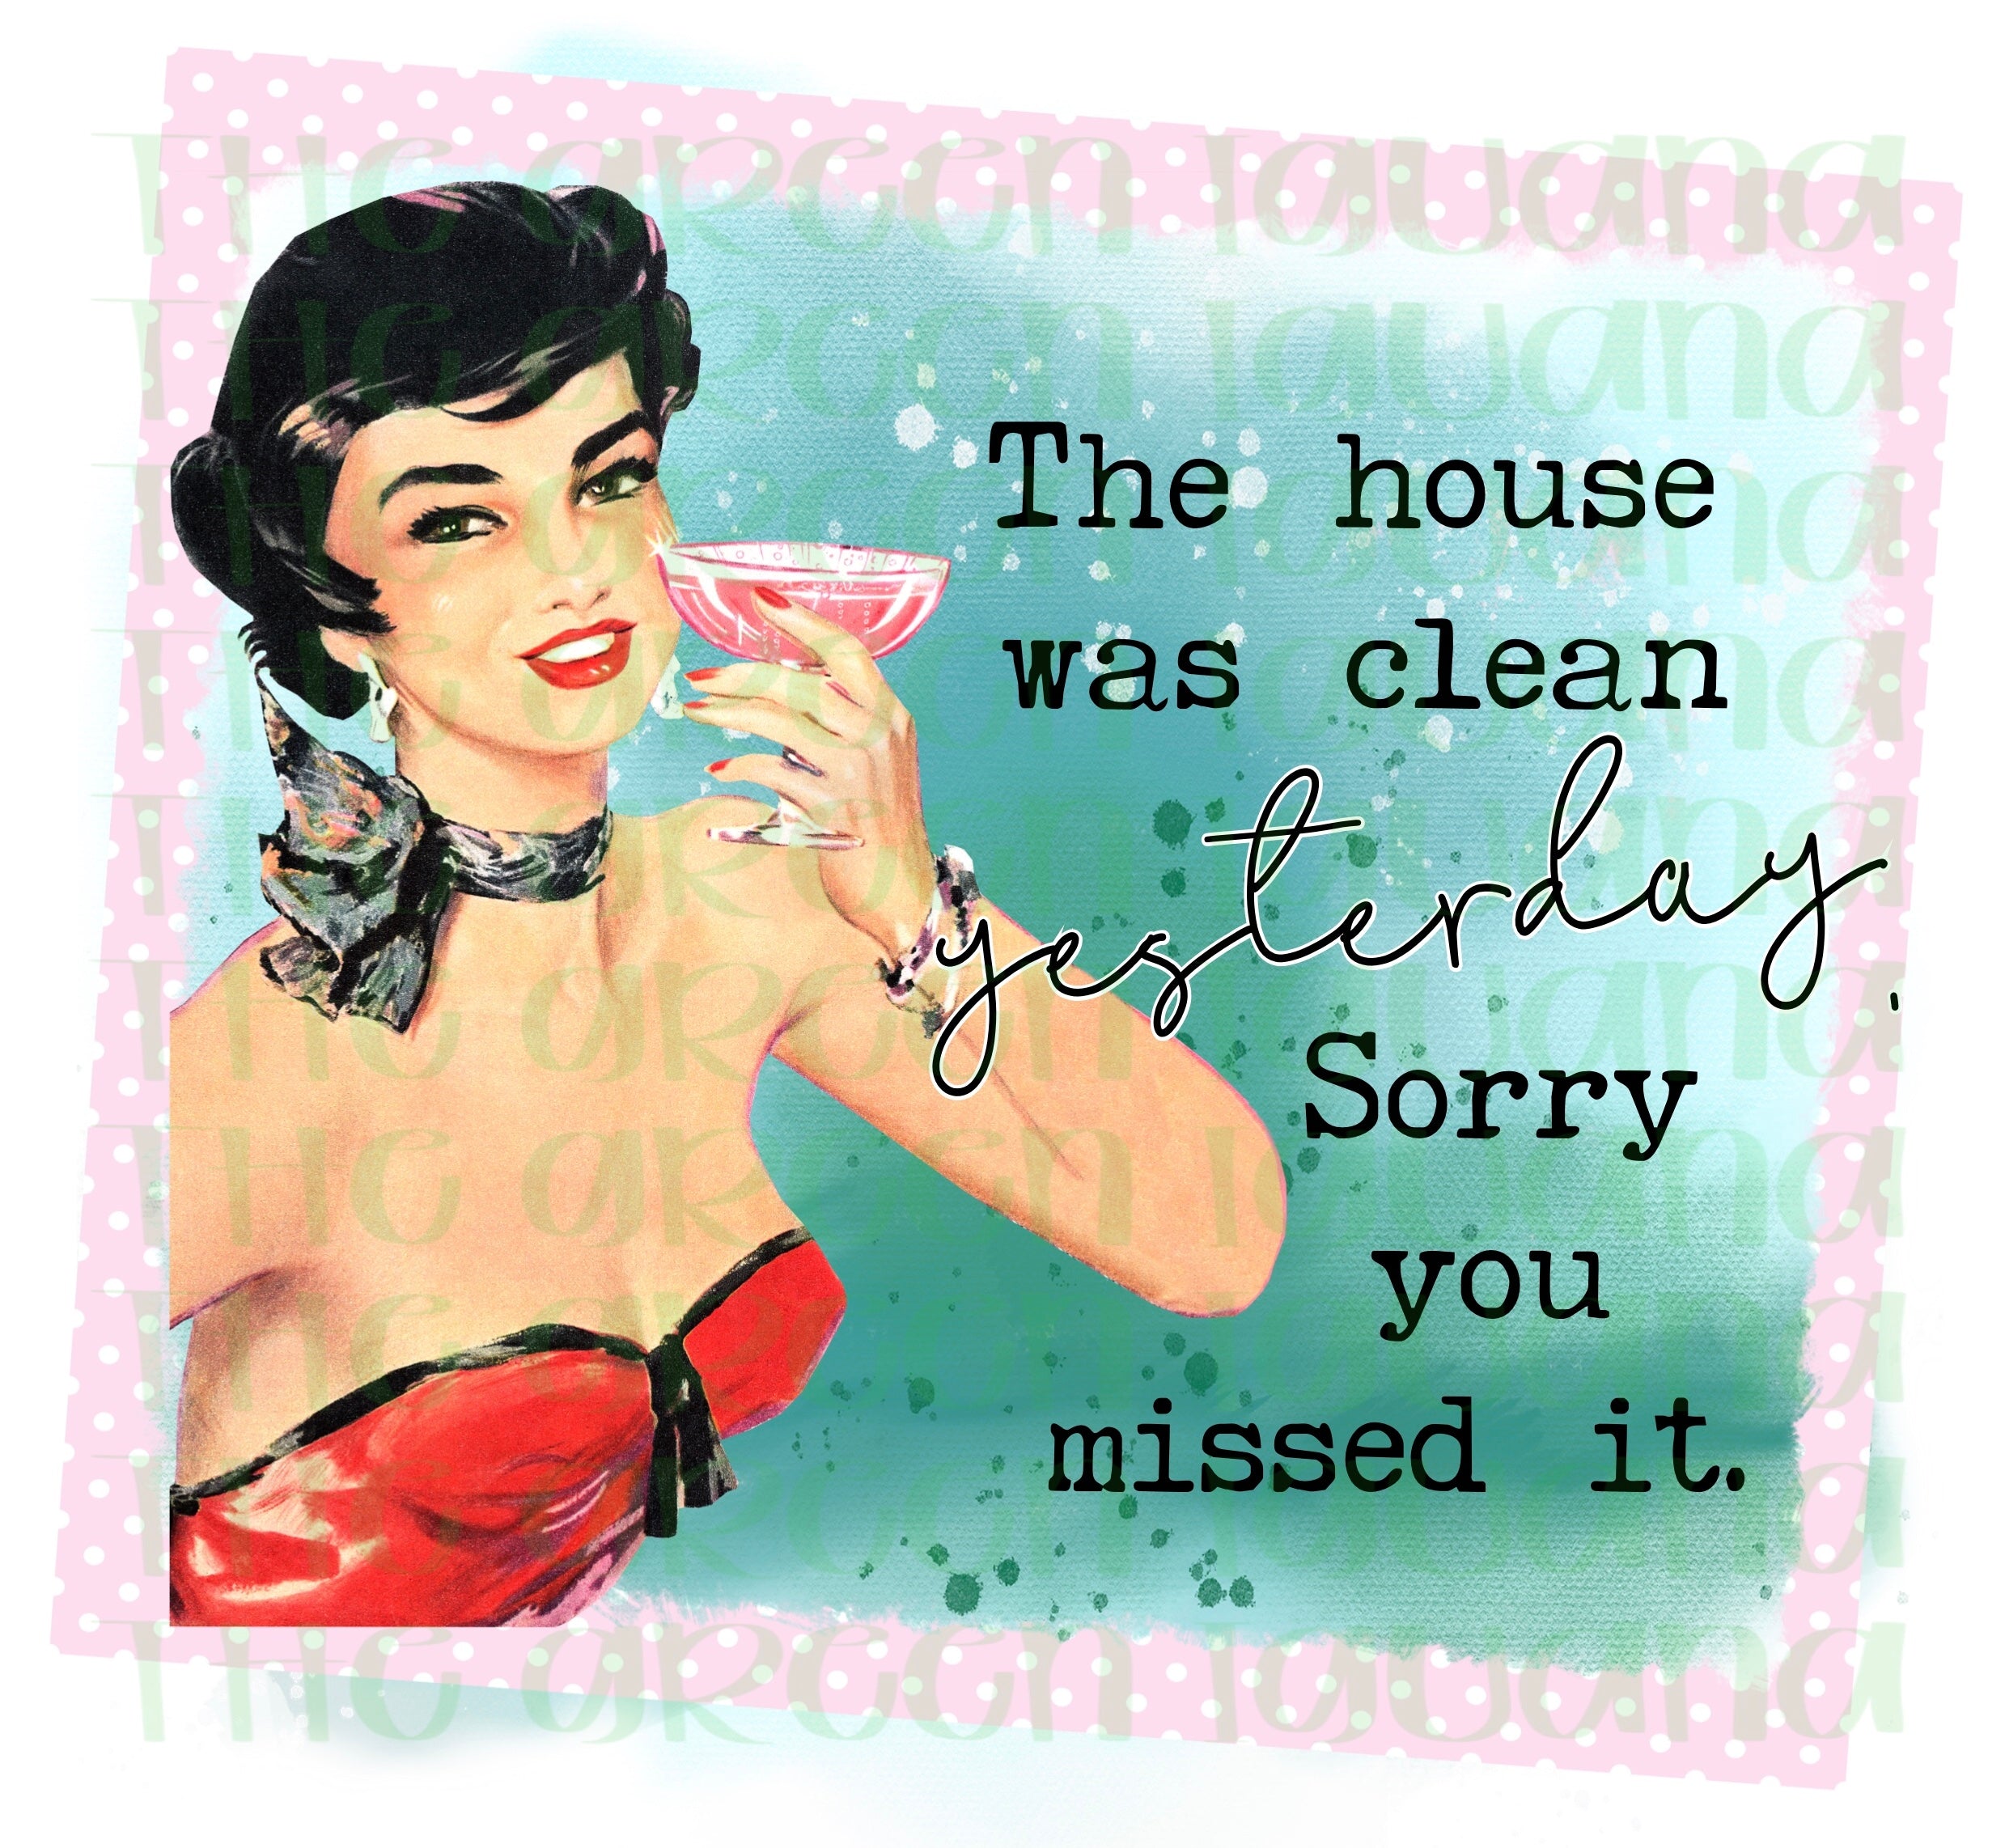 The house was clean yesterday. Sorry you missed it.